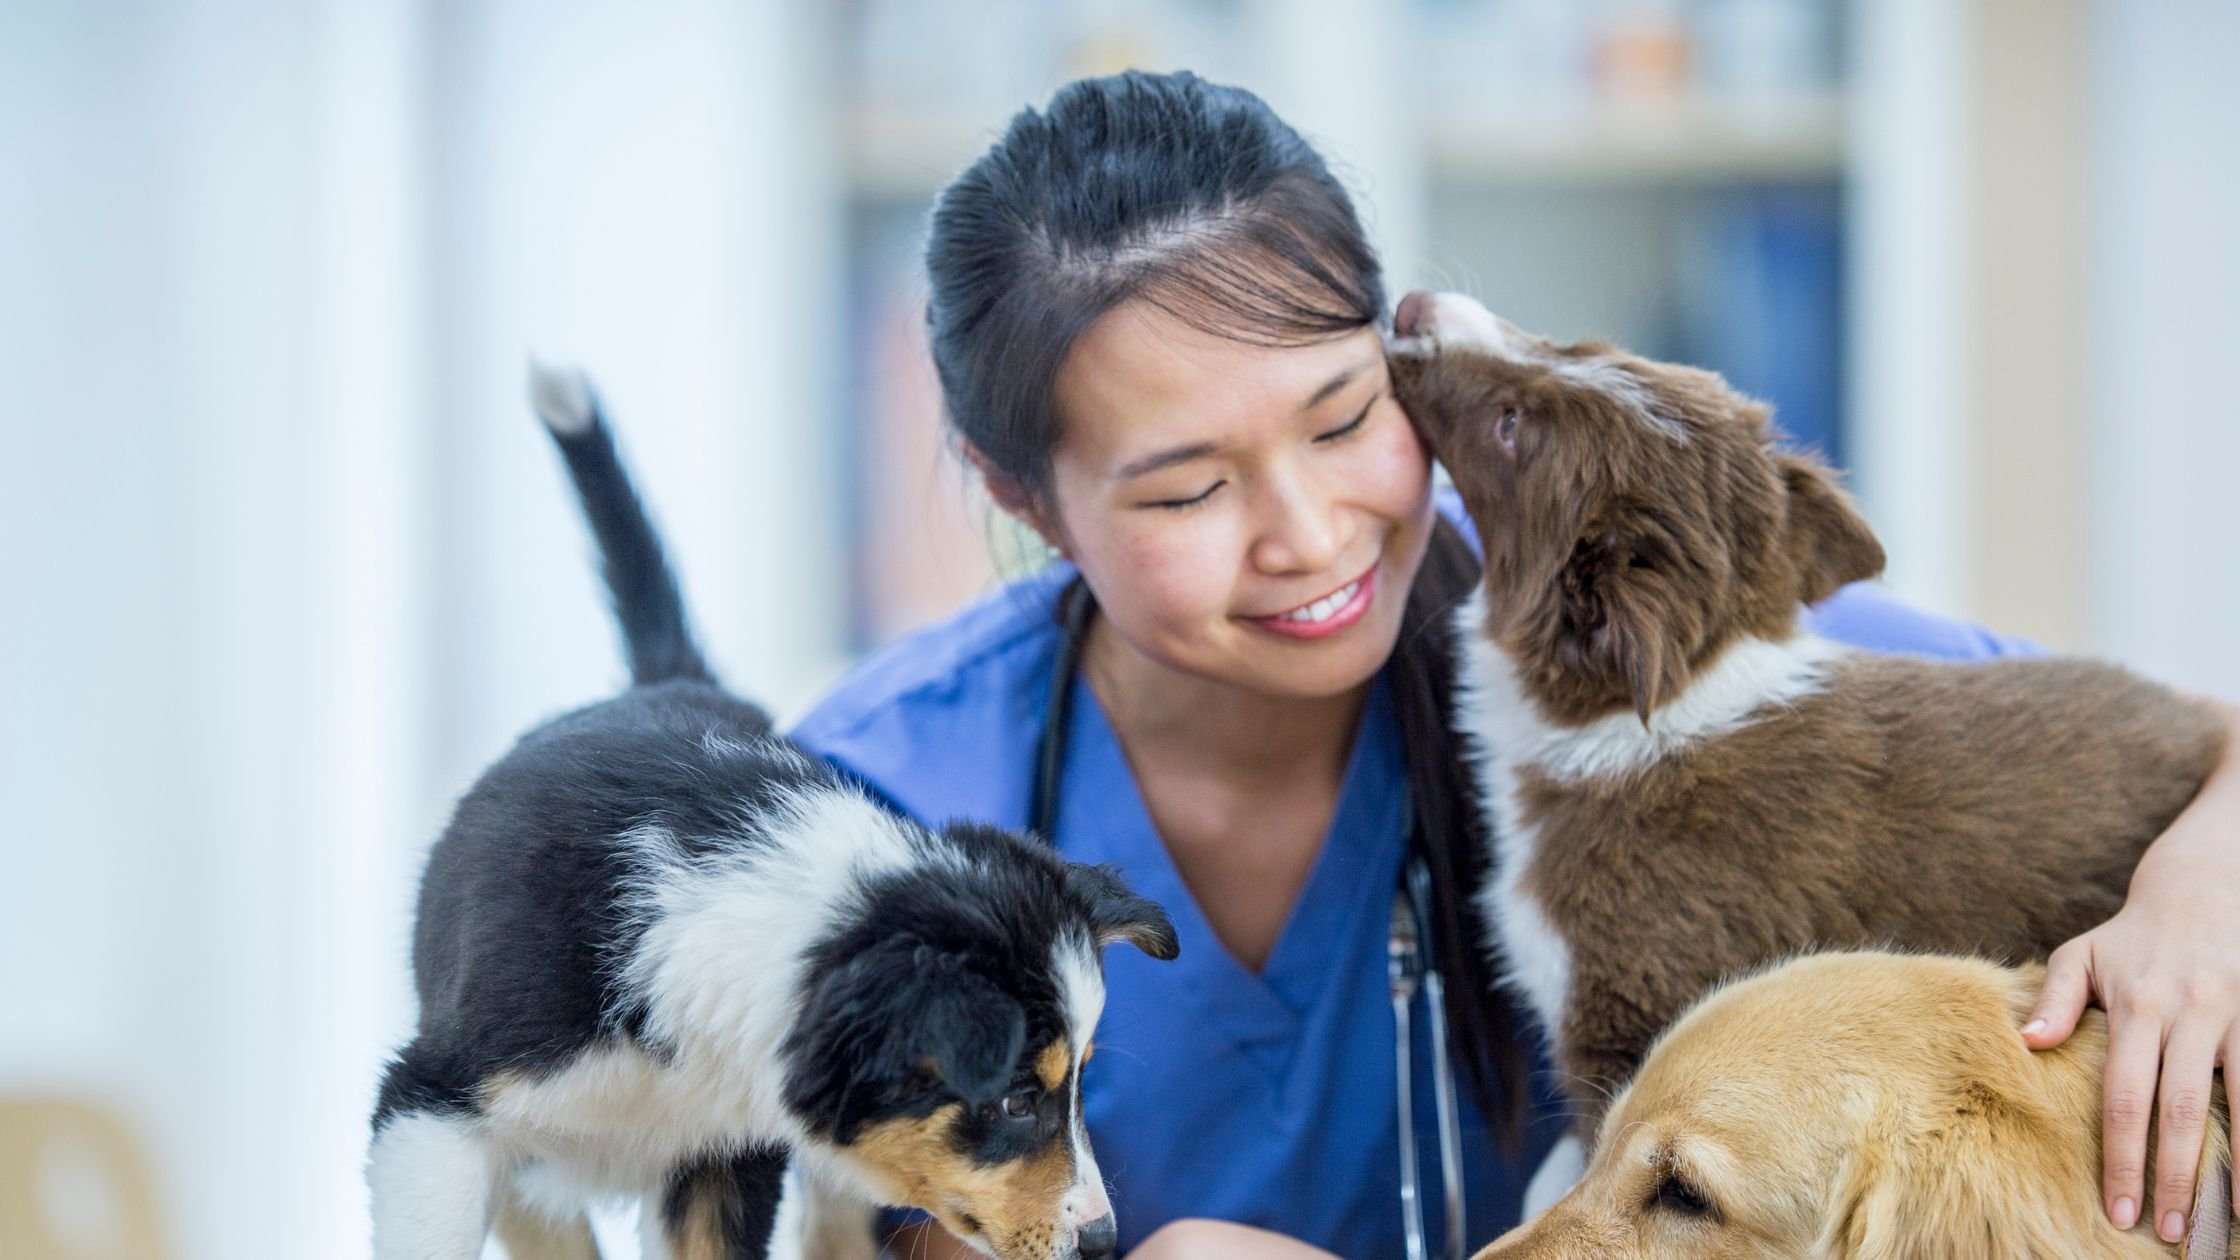 Veterinary Support Assistant - Blended Course